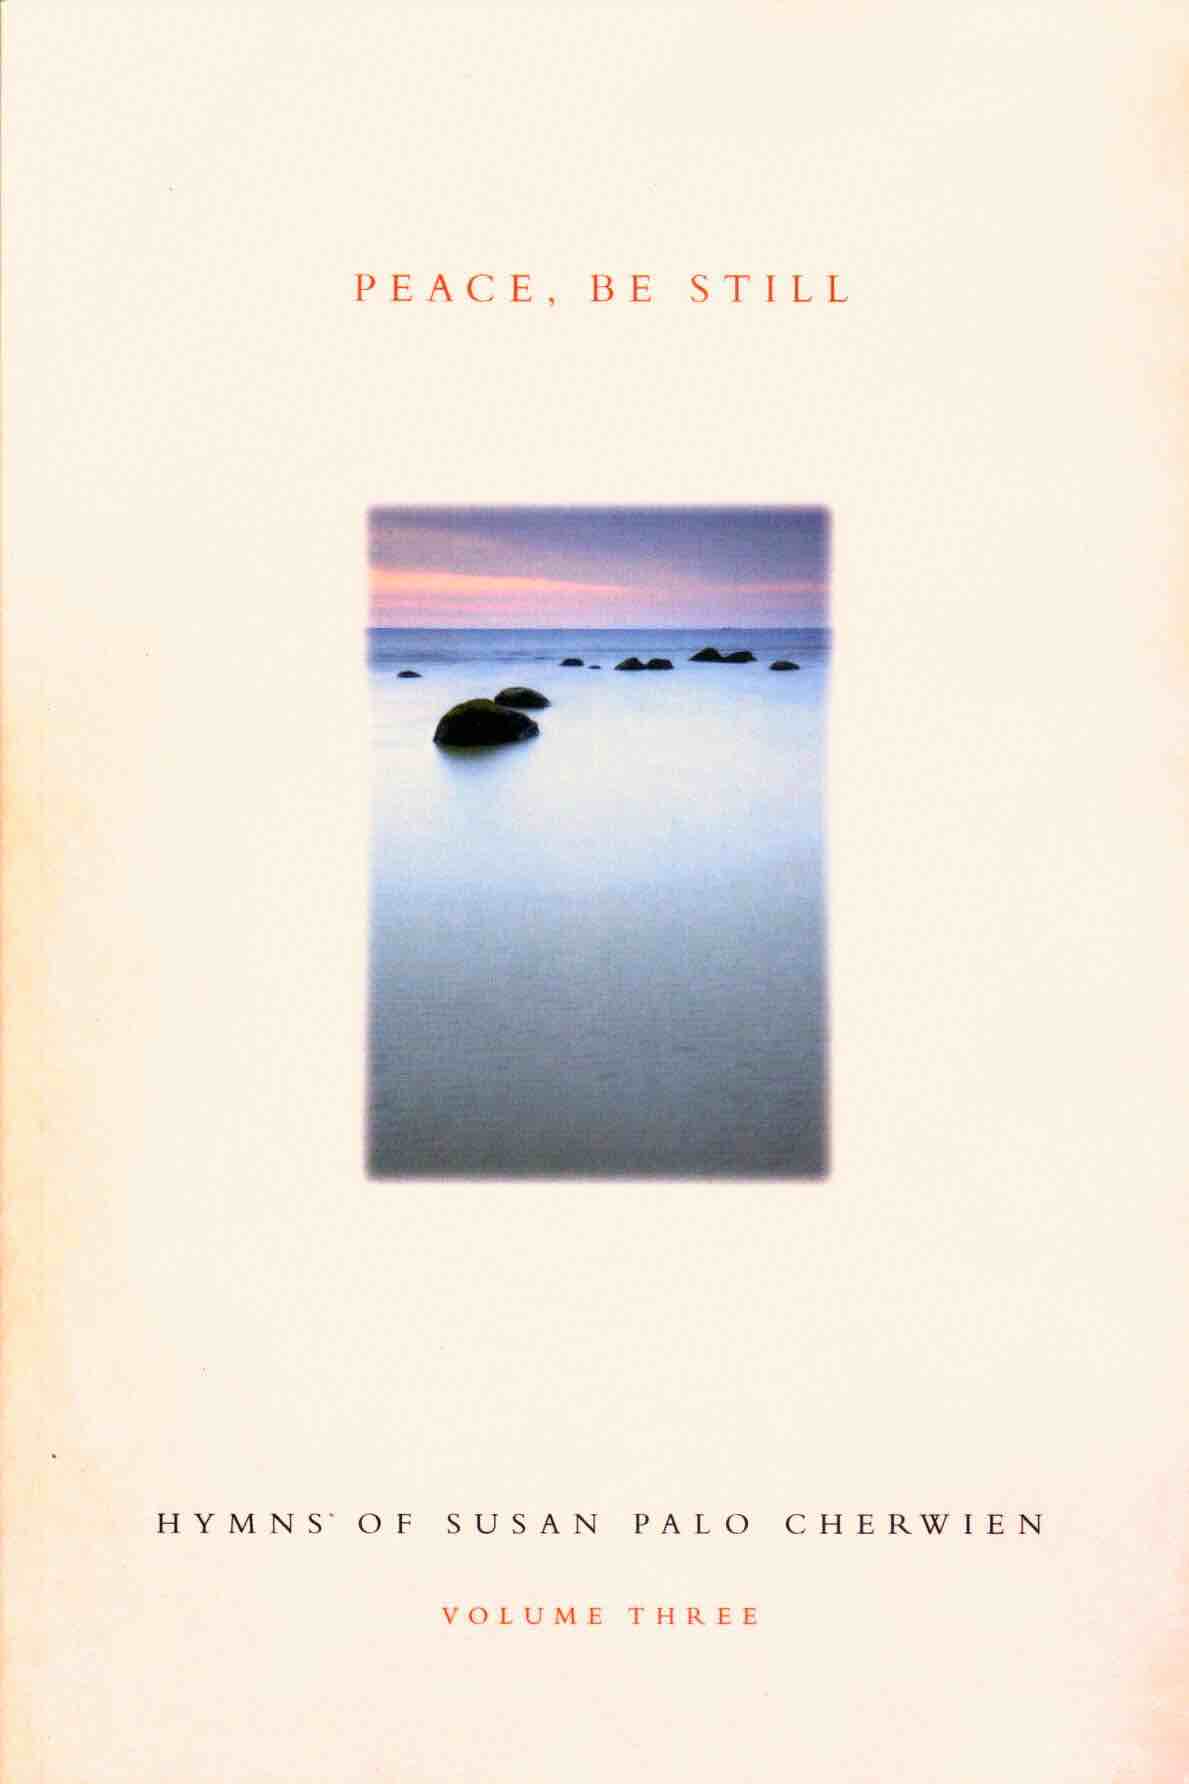 Cover of Peace, Be Still